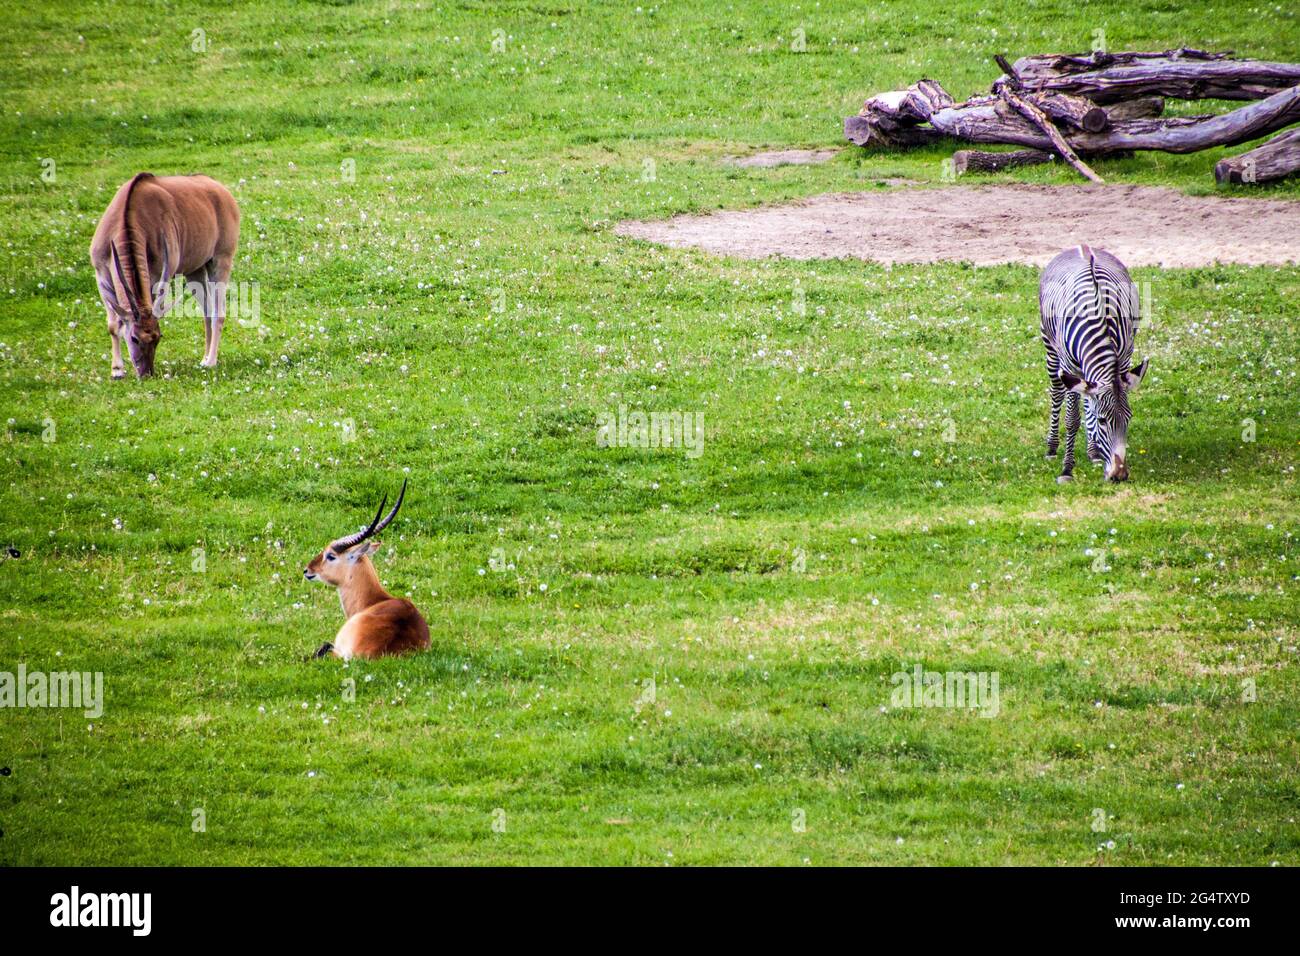 Sable antelope (Hippotragus Niger) and Grevy's zebra (Equus Grevy) in Prague zoo Stock Photo